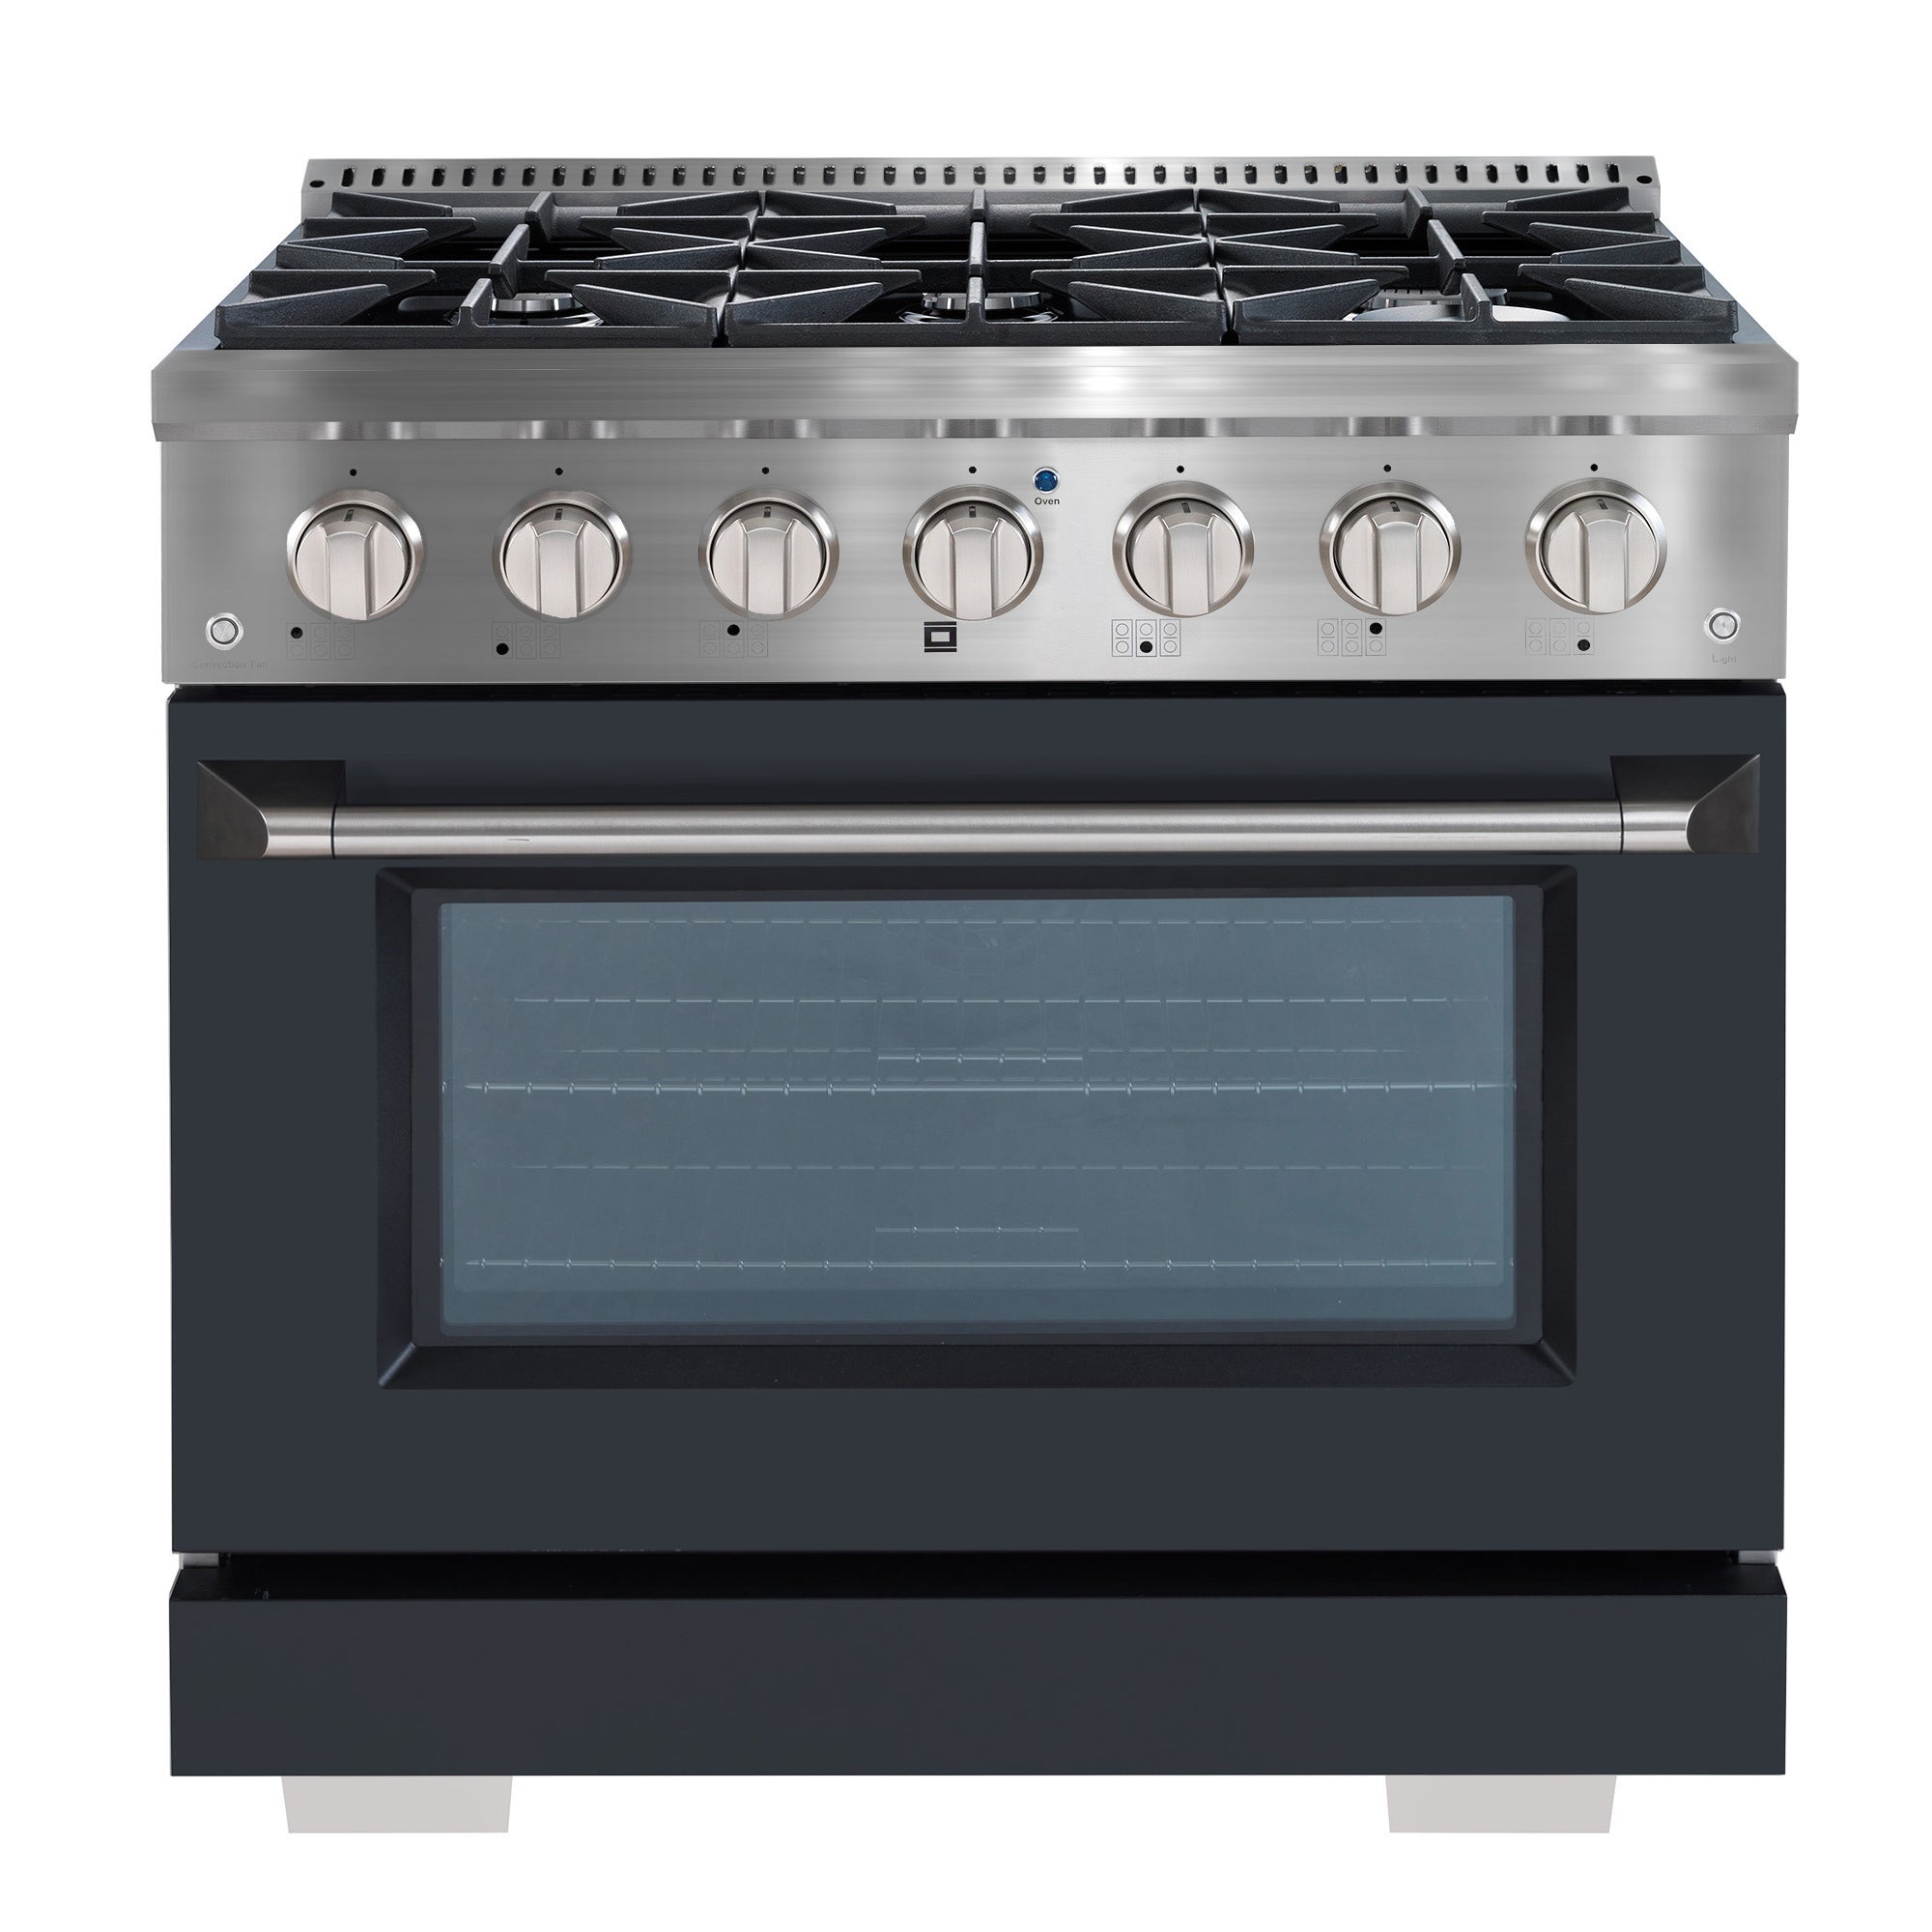 Ancona 2-piece Kitchen Appliance Package with 36” Dual Fuel Range with Black Door and 34”600 CFM Ducted Built-in Range Hood